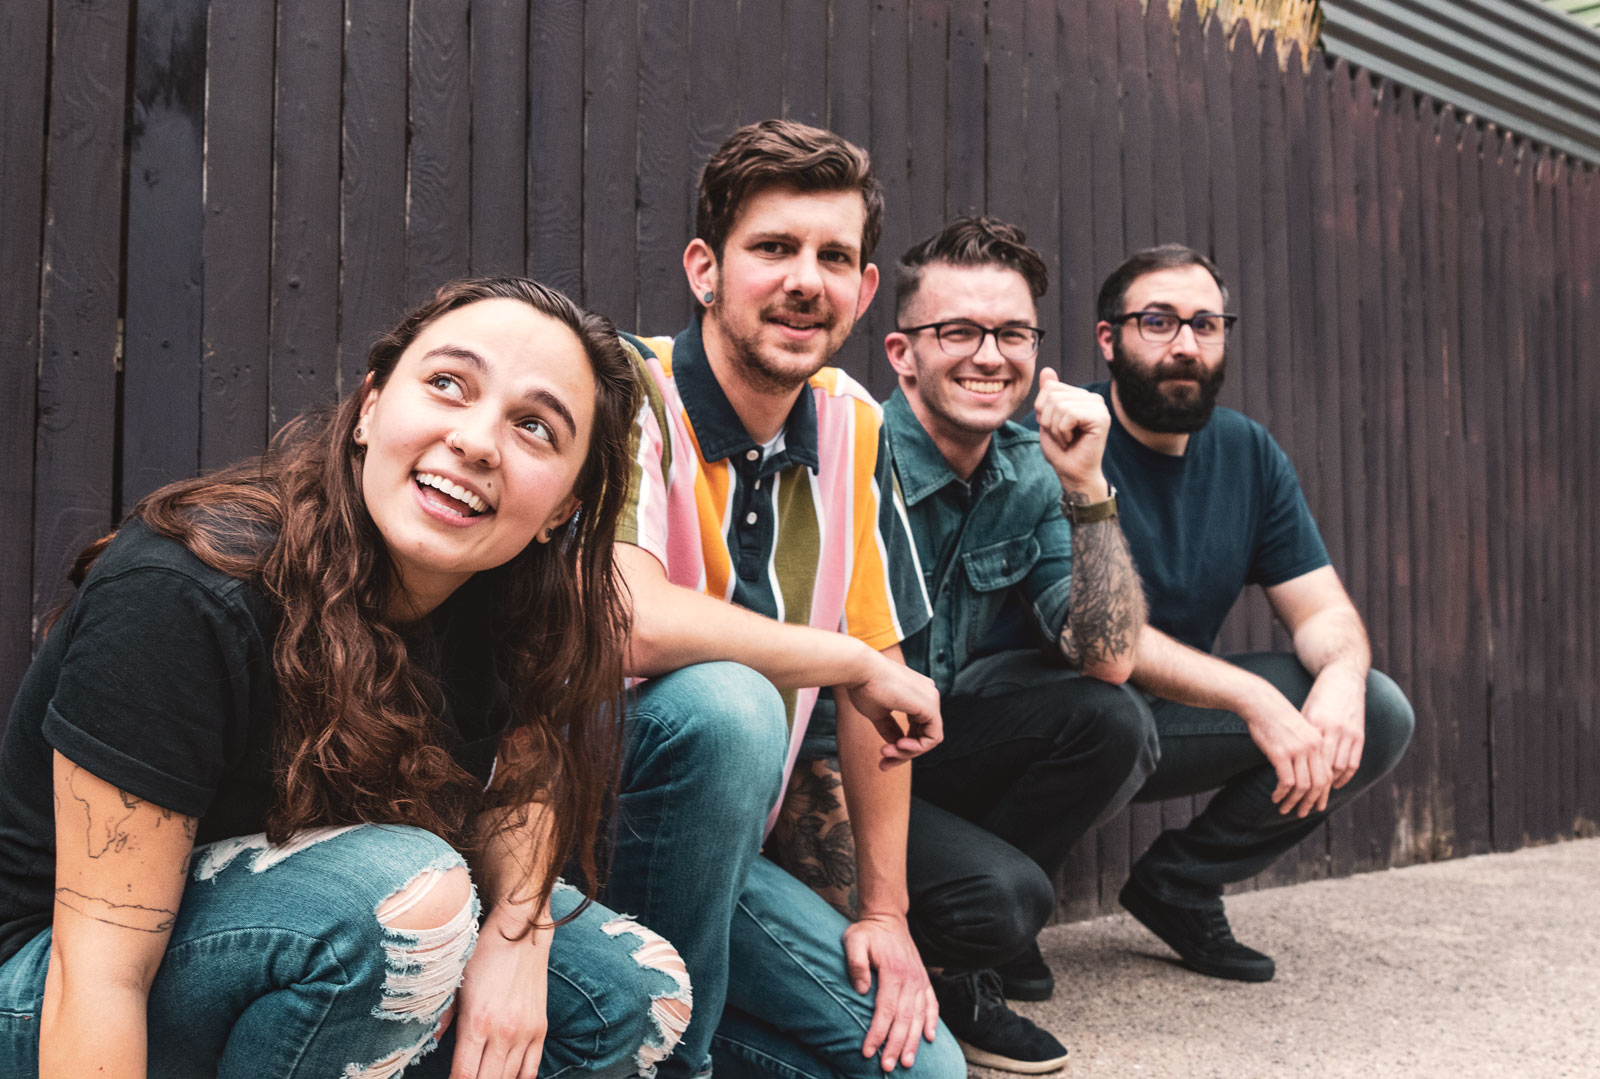 Punk quartet Sincere Engineer sign to Hopeless Records; release new track “Trust Me”